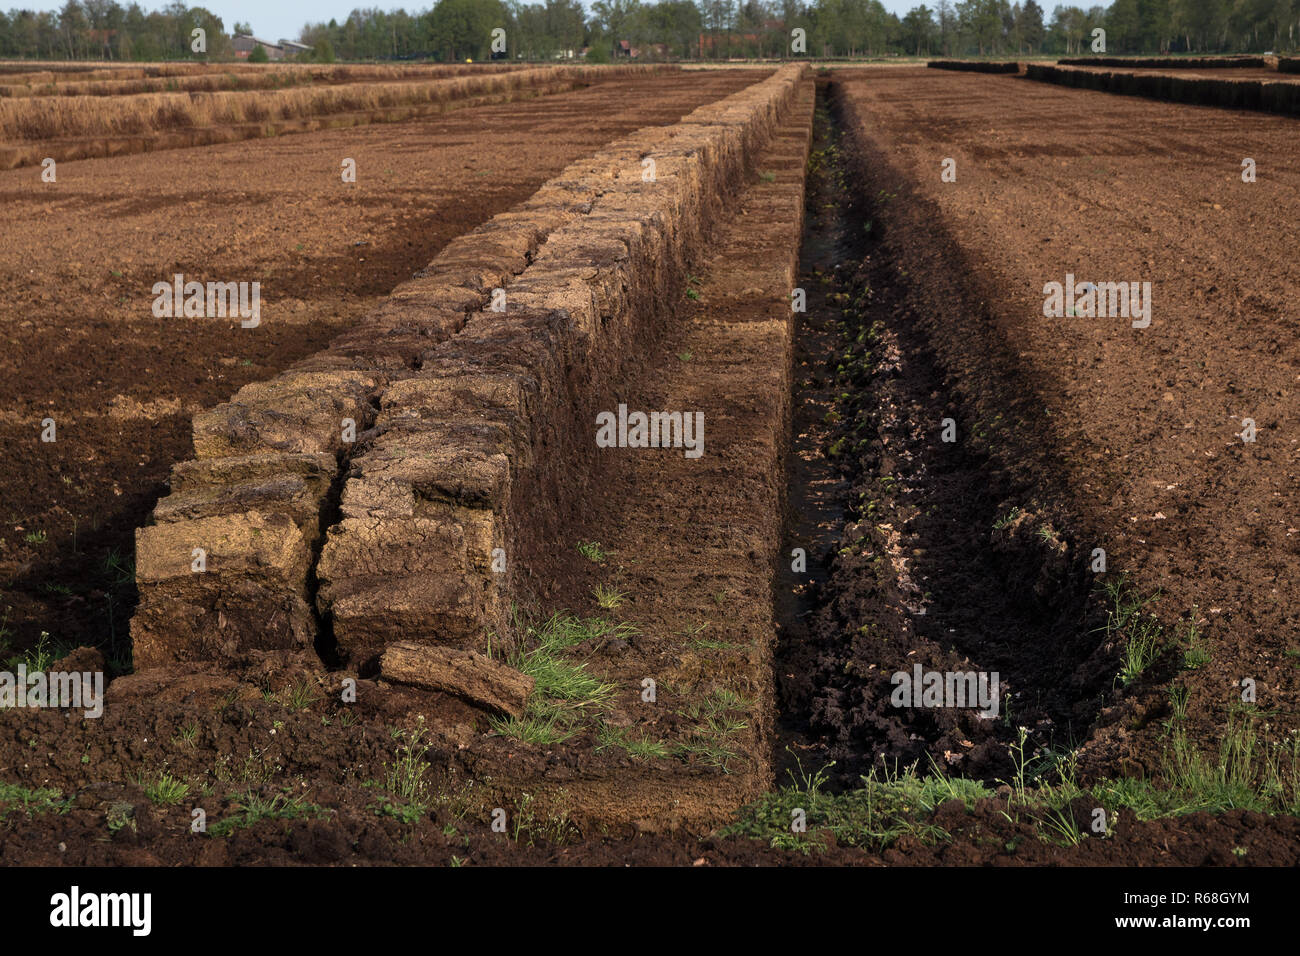 industrial peat extraction with a ditch and piled turf blocks, nature destruction of a raised bog landscape in the Venner Moor, Lower Saxony, Germany, Stock Photo